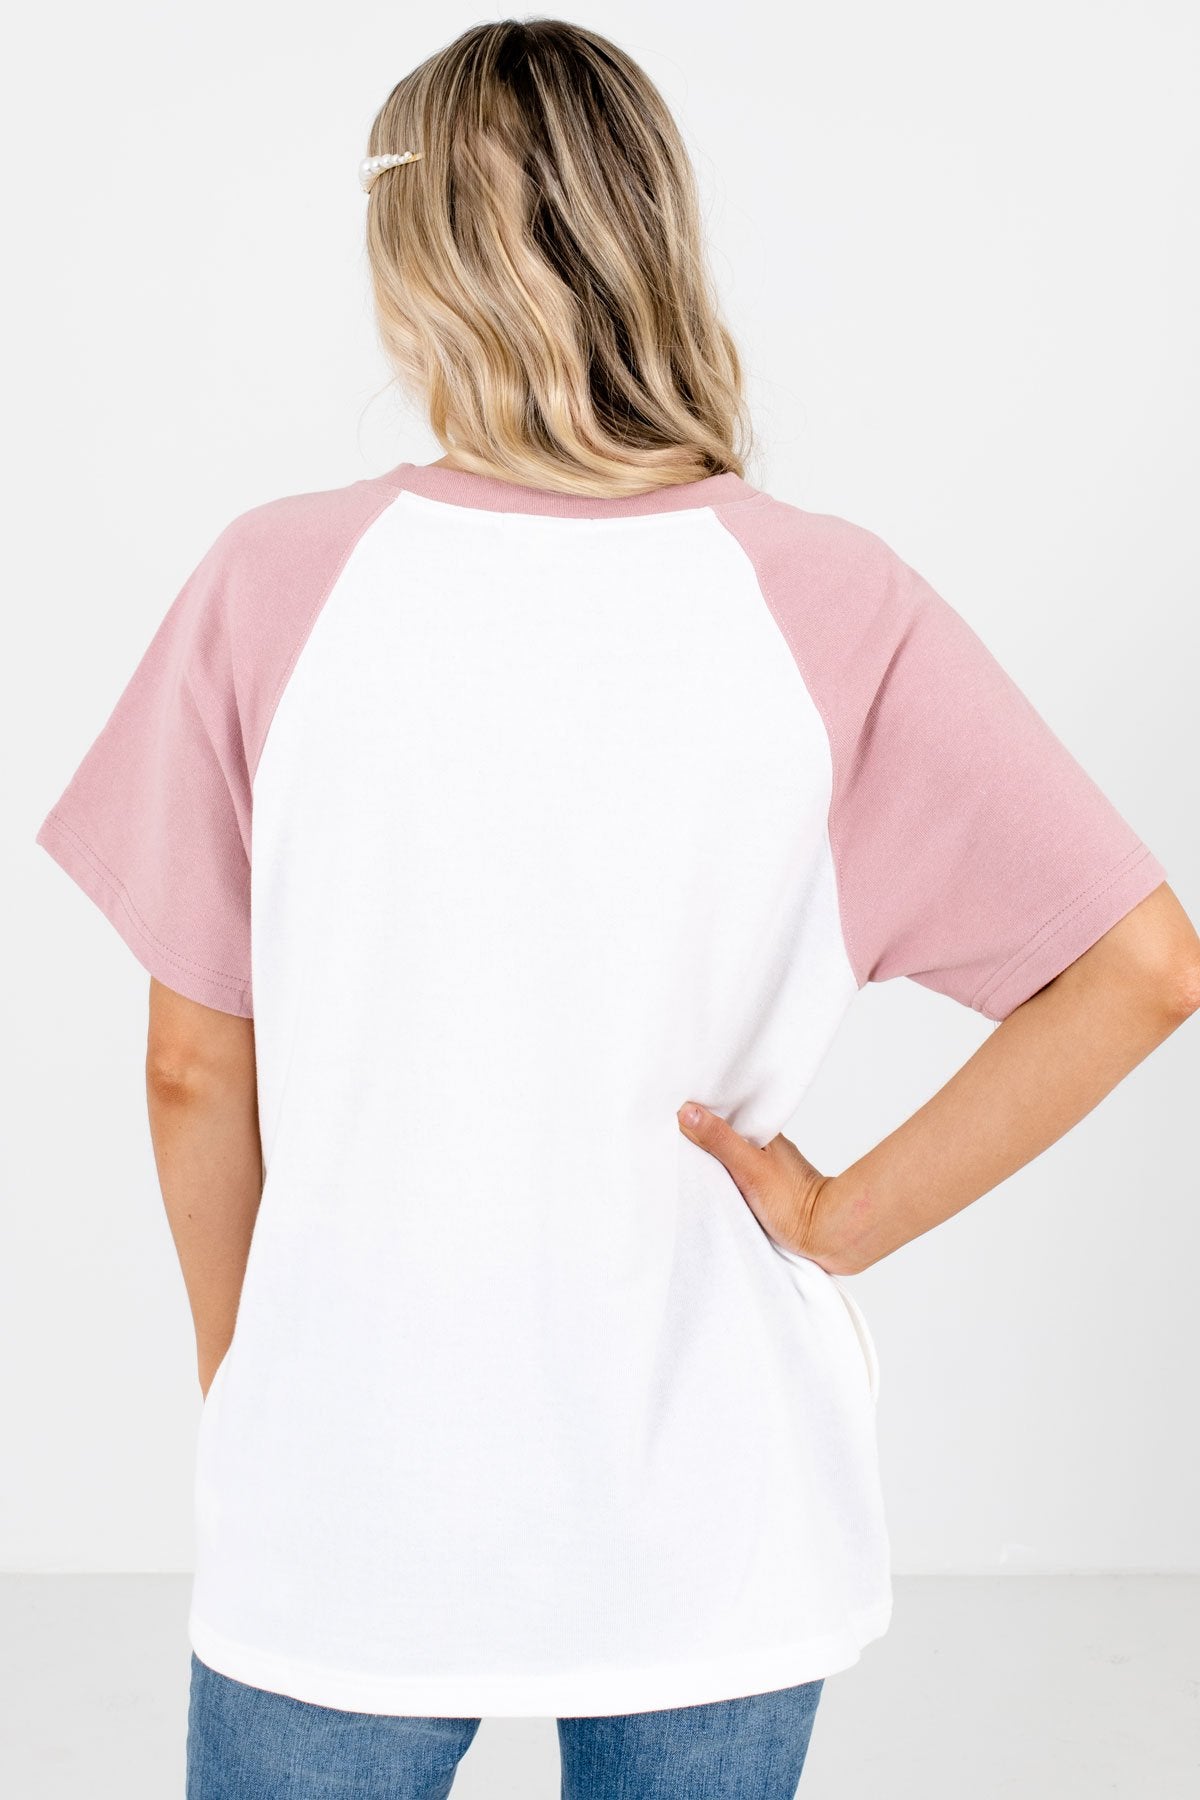 Women's White and Pink Boutique Tee with Pockets